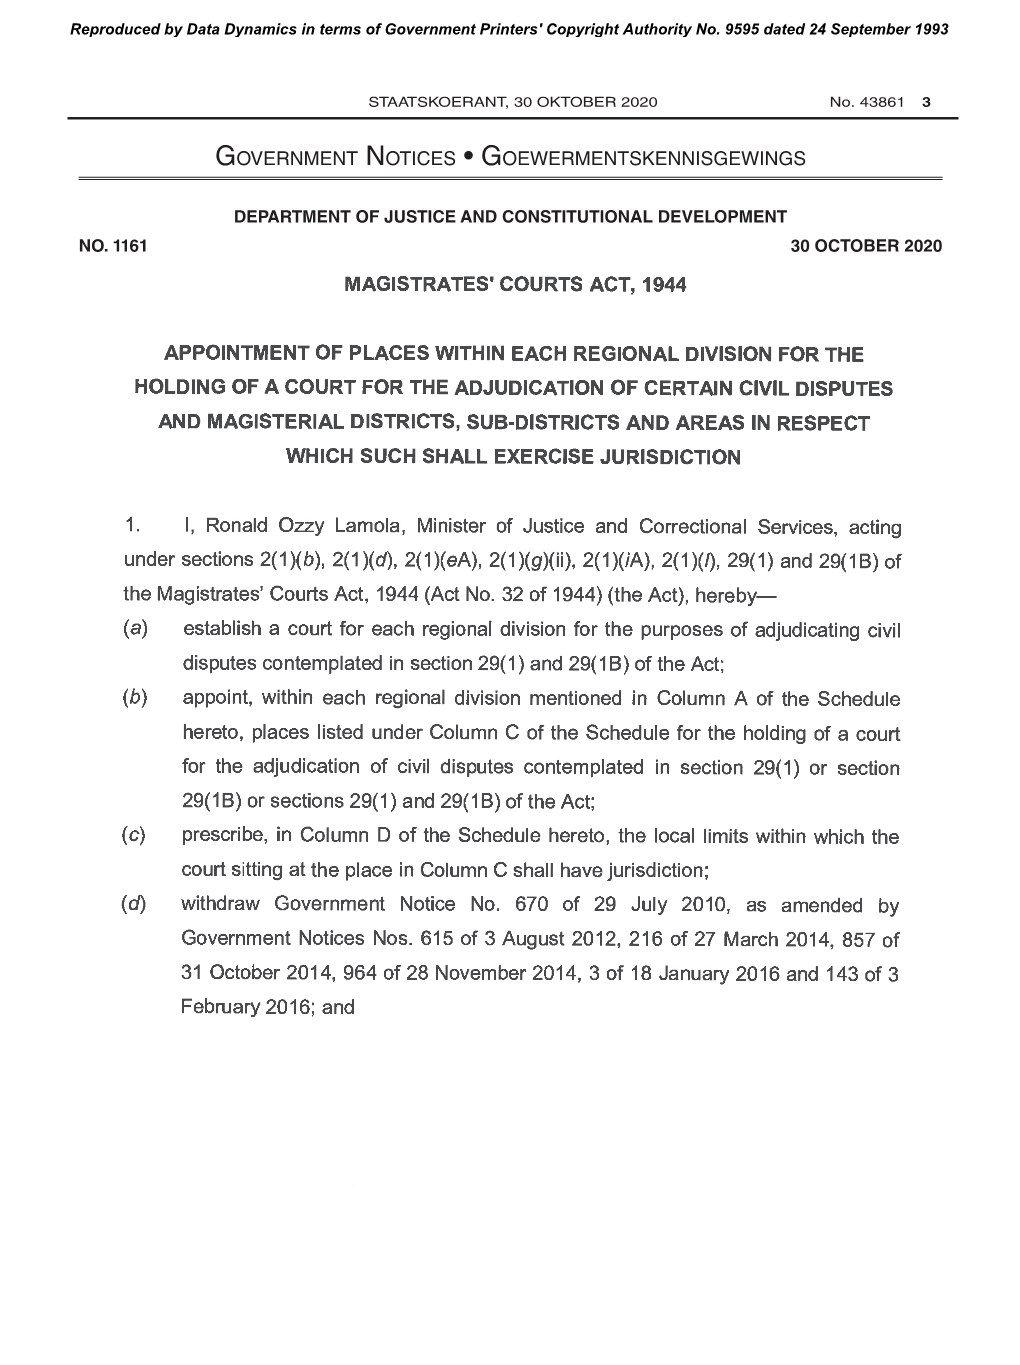 Withdraw Government Notice No. 670 of 29 July 2010, As Amended by Government Notices Nos